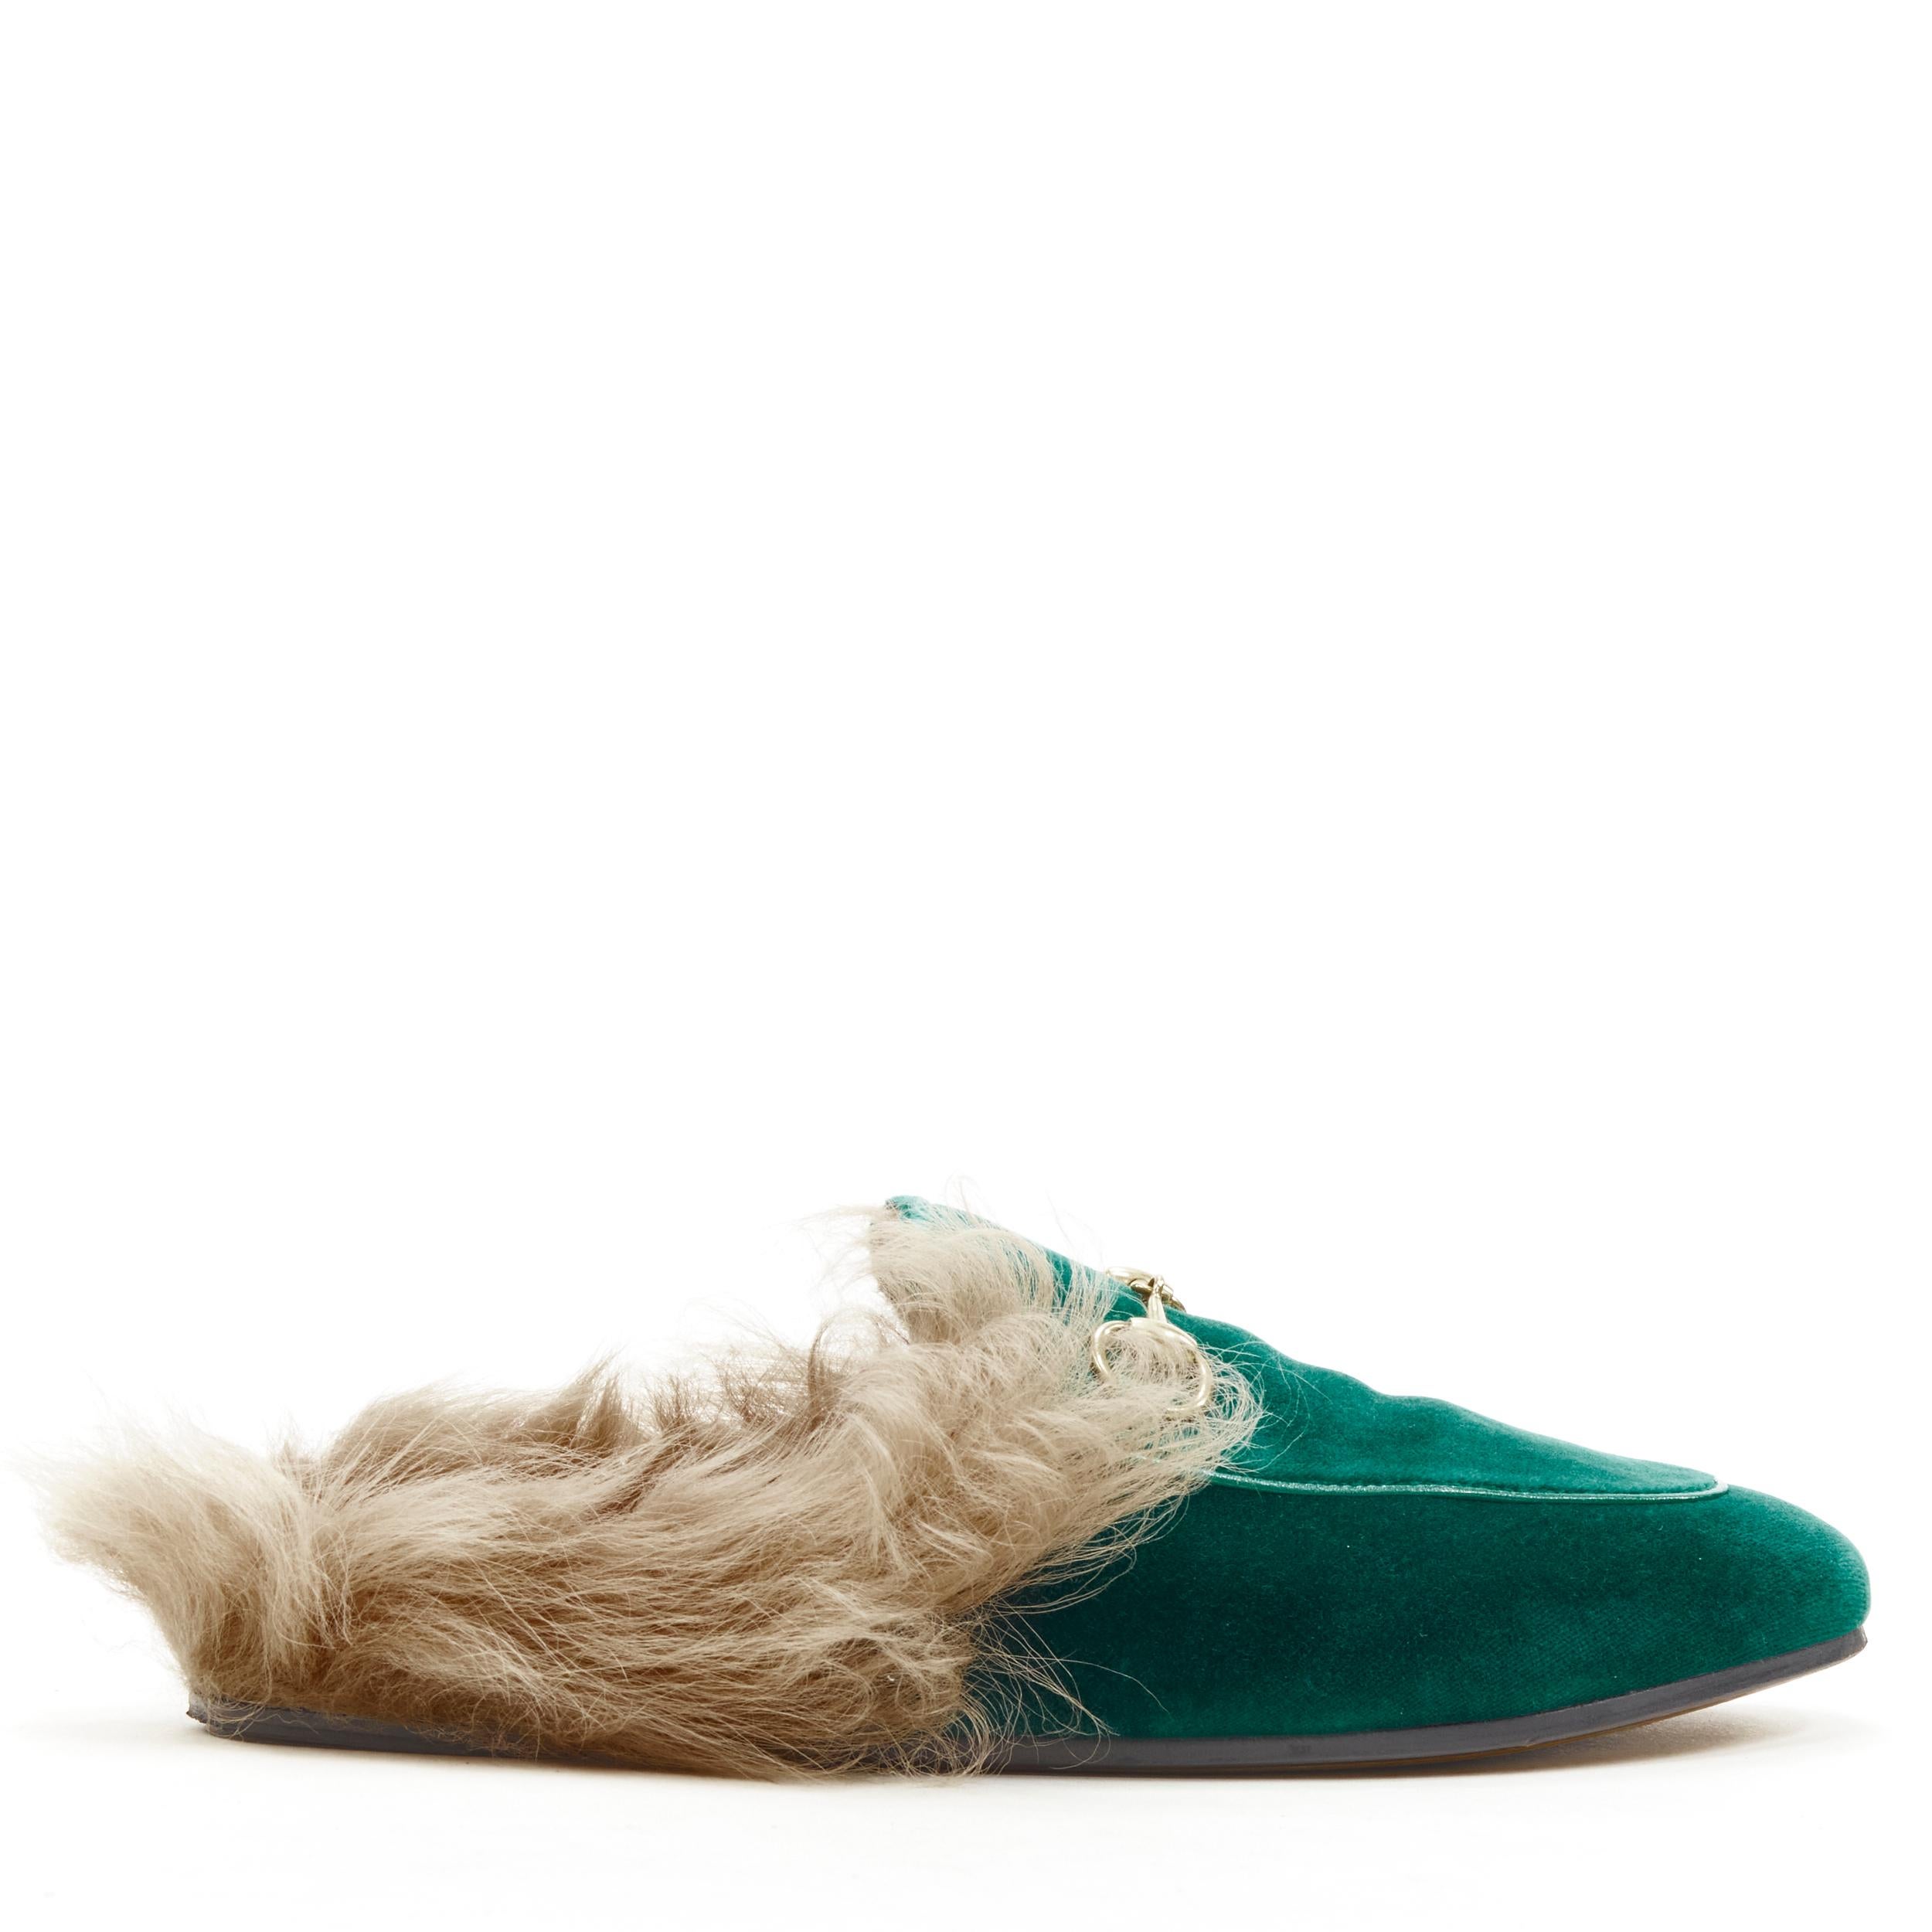 GUCCI Princetown green velvet fur lined gold Horsebit mule loafer EU36 
Reference: ANWU/A00332 
Brand: Gucci 
Designer: Alessandro Michele 
Model: Princetown 
Material: Velvet 
Color: Green 
Pattern: Solid 
Extra Detail: Fully lined in fur. 
Made